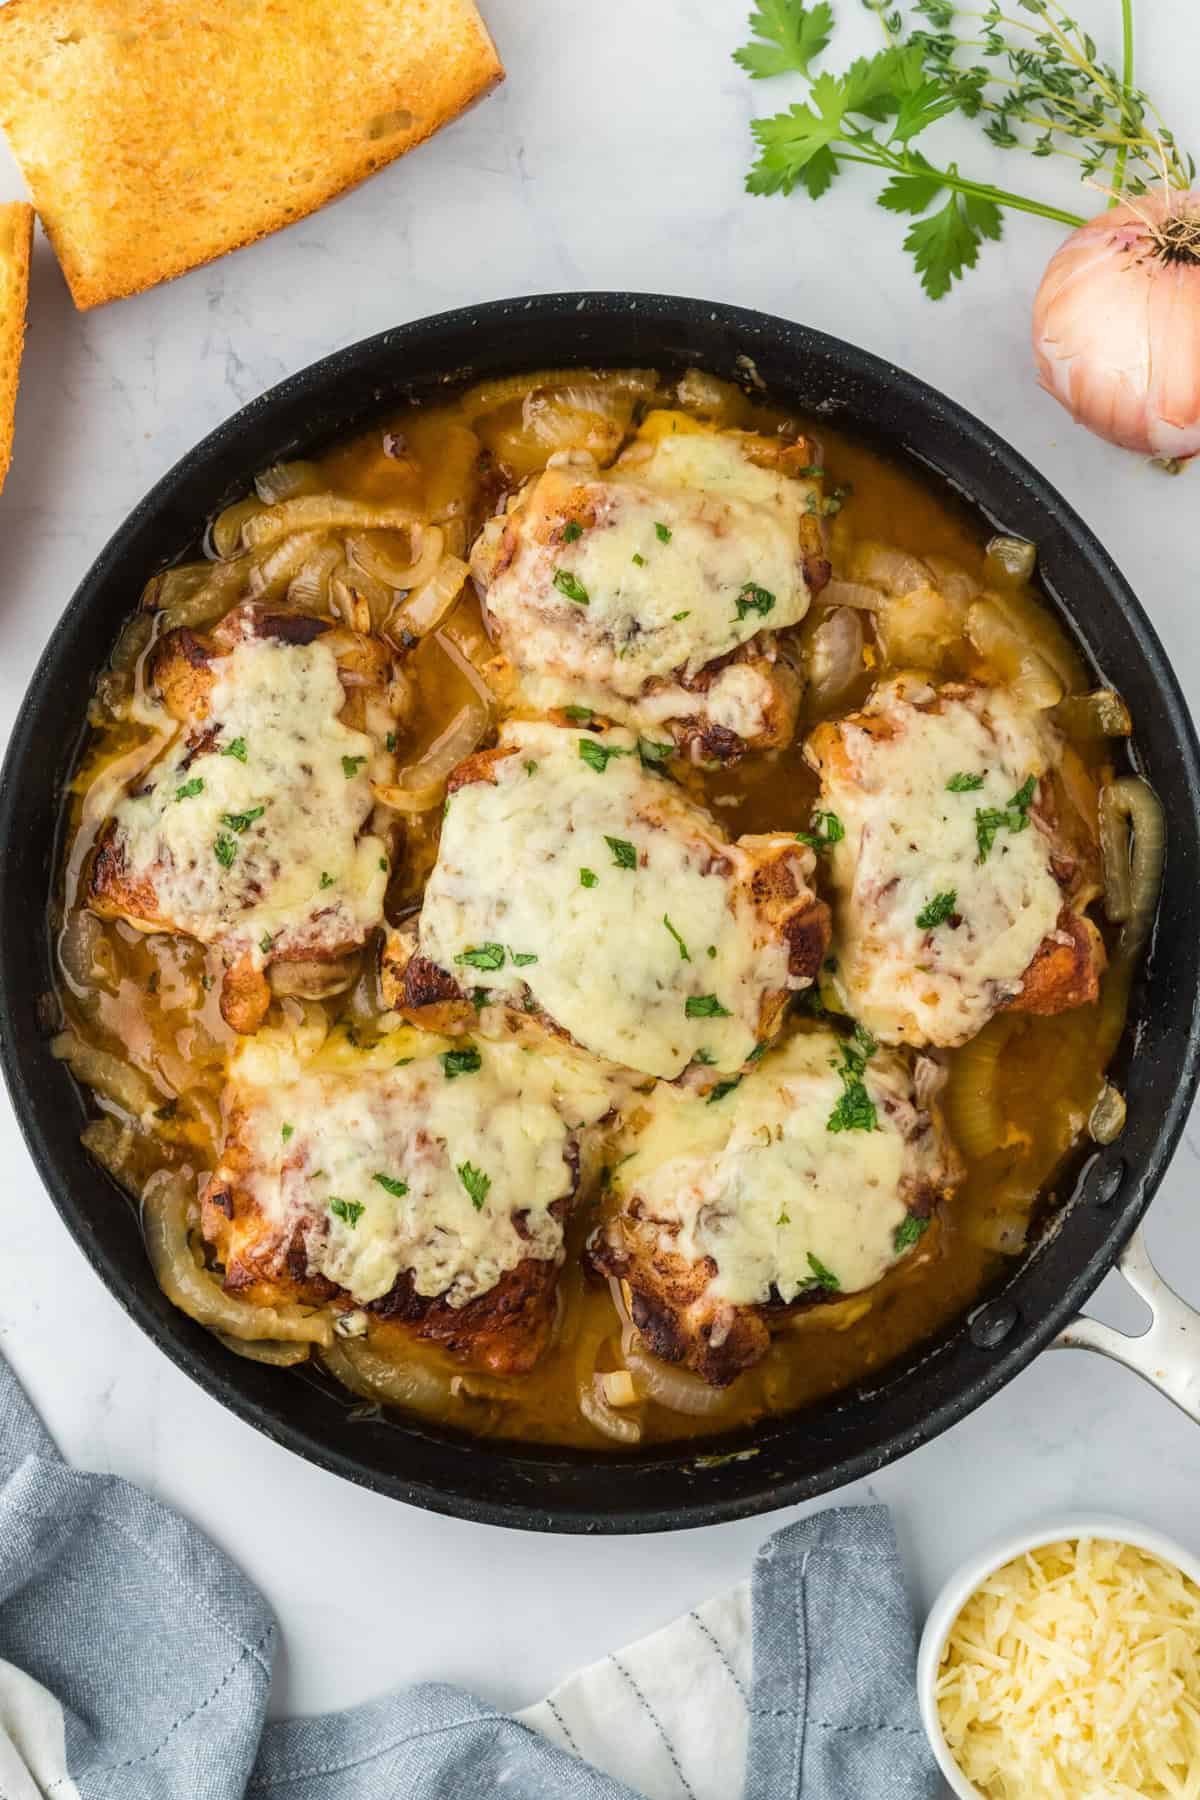 Overhead shot of french onion chicken in a skillet on a white background. In the background, there are ingredients like onions, garlic, fresh parsley, a bunch of fresh thyme, shredded cheese, and toasted baguette slices